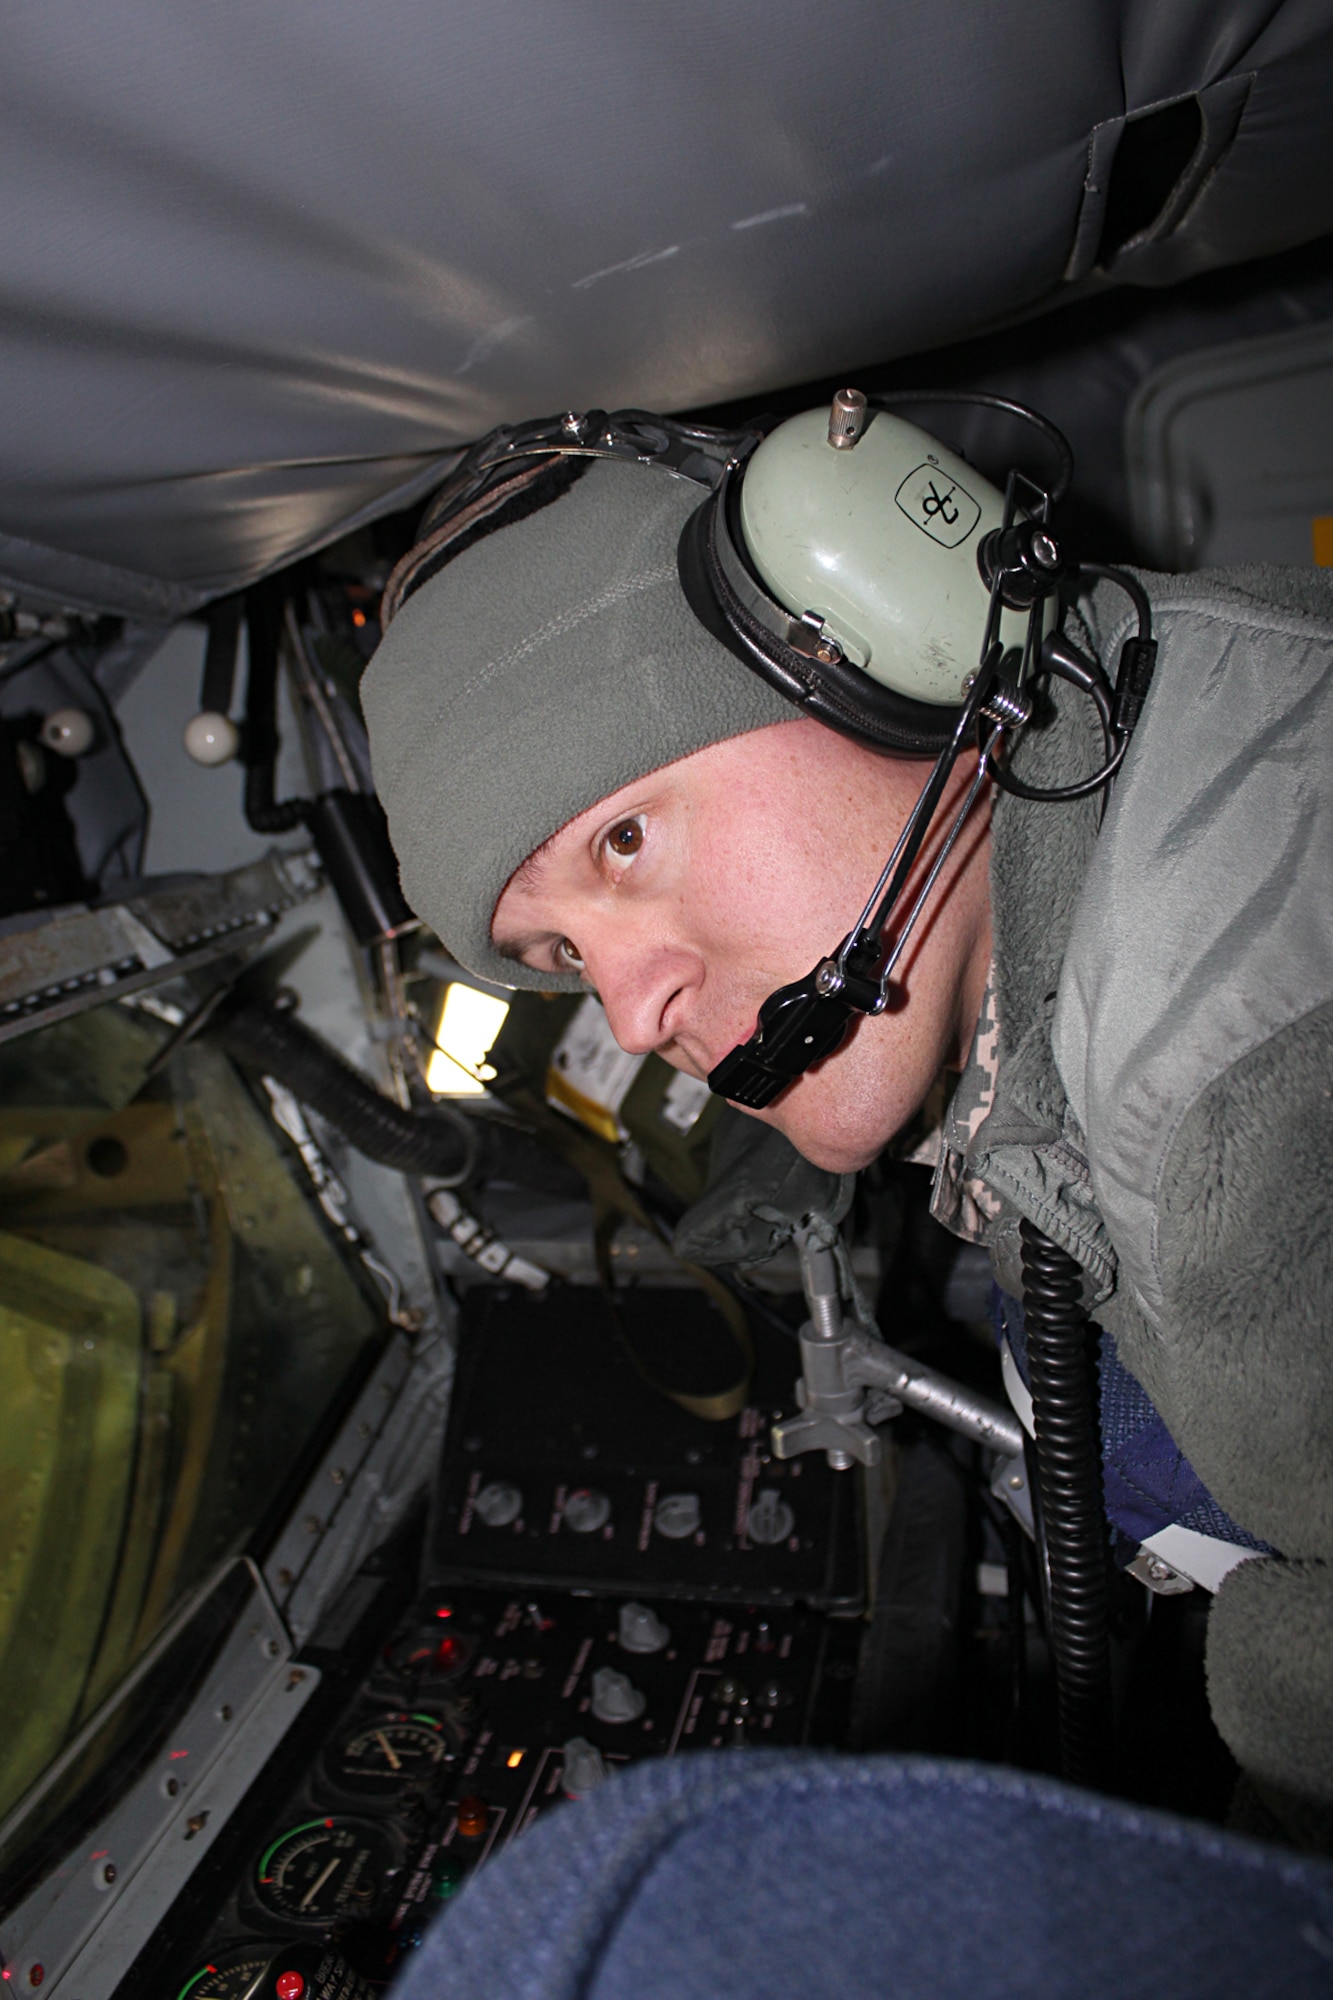 141206-Z-VA676-051 – Tech. Sgt. Timothy Kelly, 191st Maintenance Squadron, works inside of the boom pod while performing some preventive maintenance on a KC-135 Stratotanker at Selfridge Air National Guard Base, Mich., Dec. 6, 2014. Fontana has been working on “heavies” like the KC-135 for the Michigan Air National Guard for about 12 years. (U.S. Air National Guard photo by Tech. Sgt. Dan Heaton)